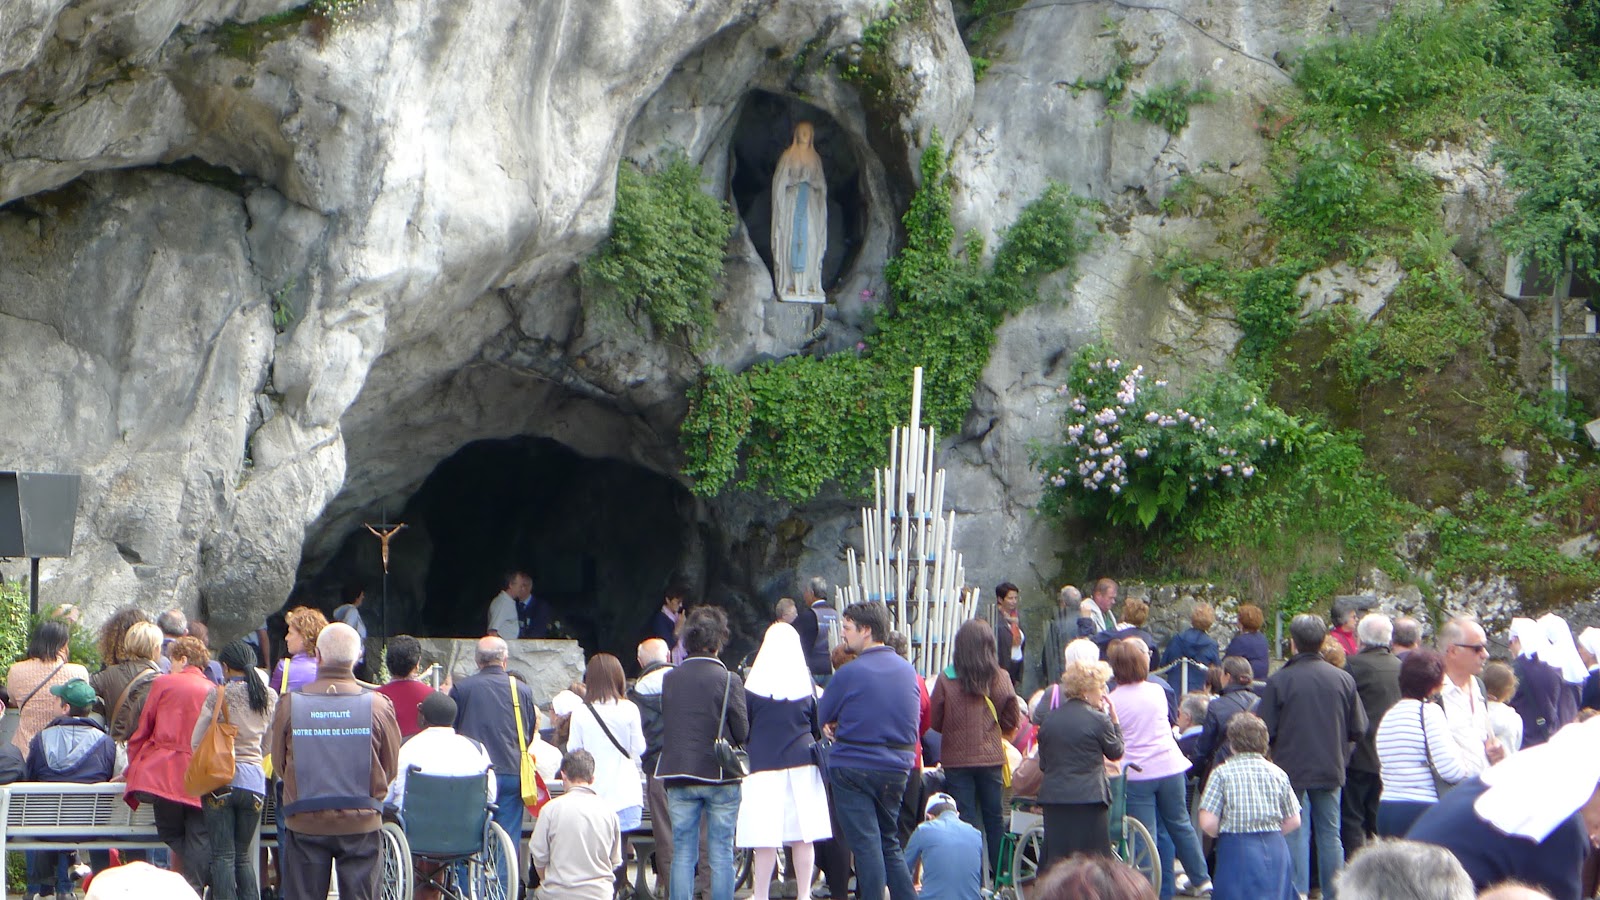 Mum from The South: The Beauty of Lourdes, France